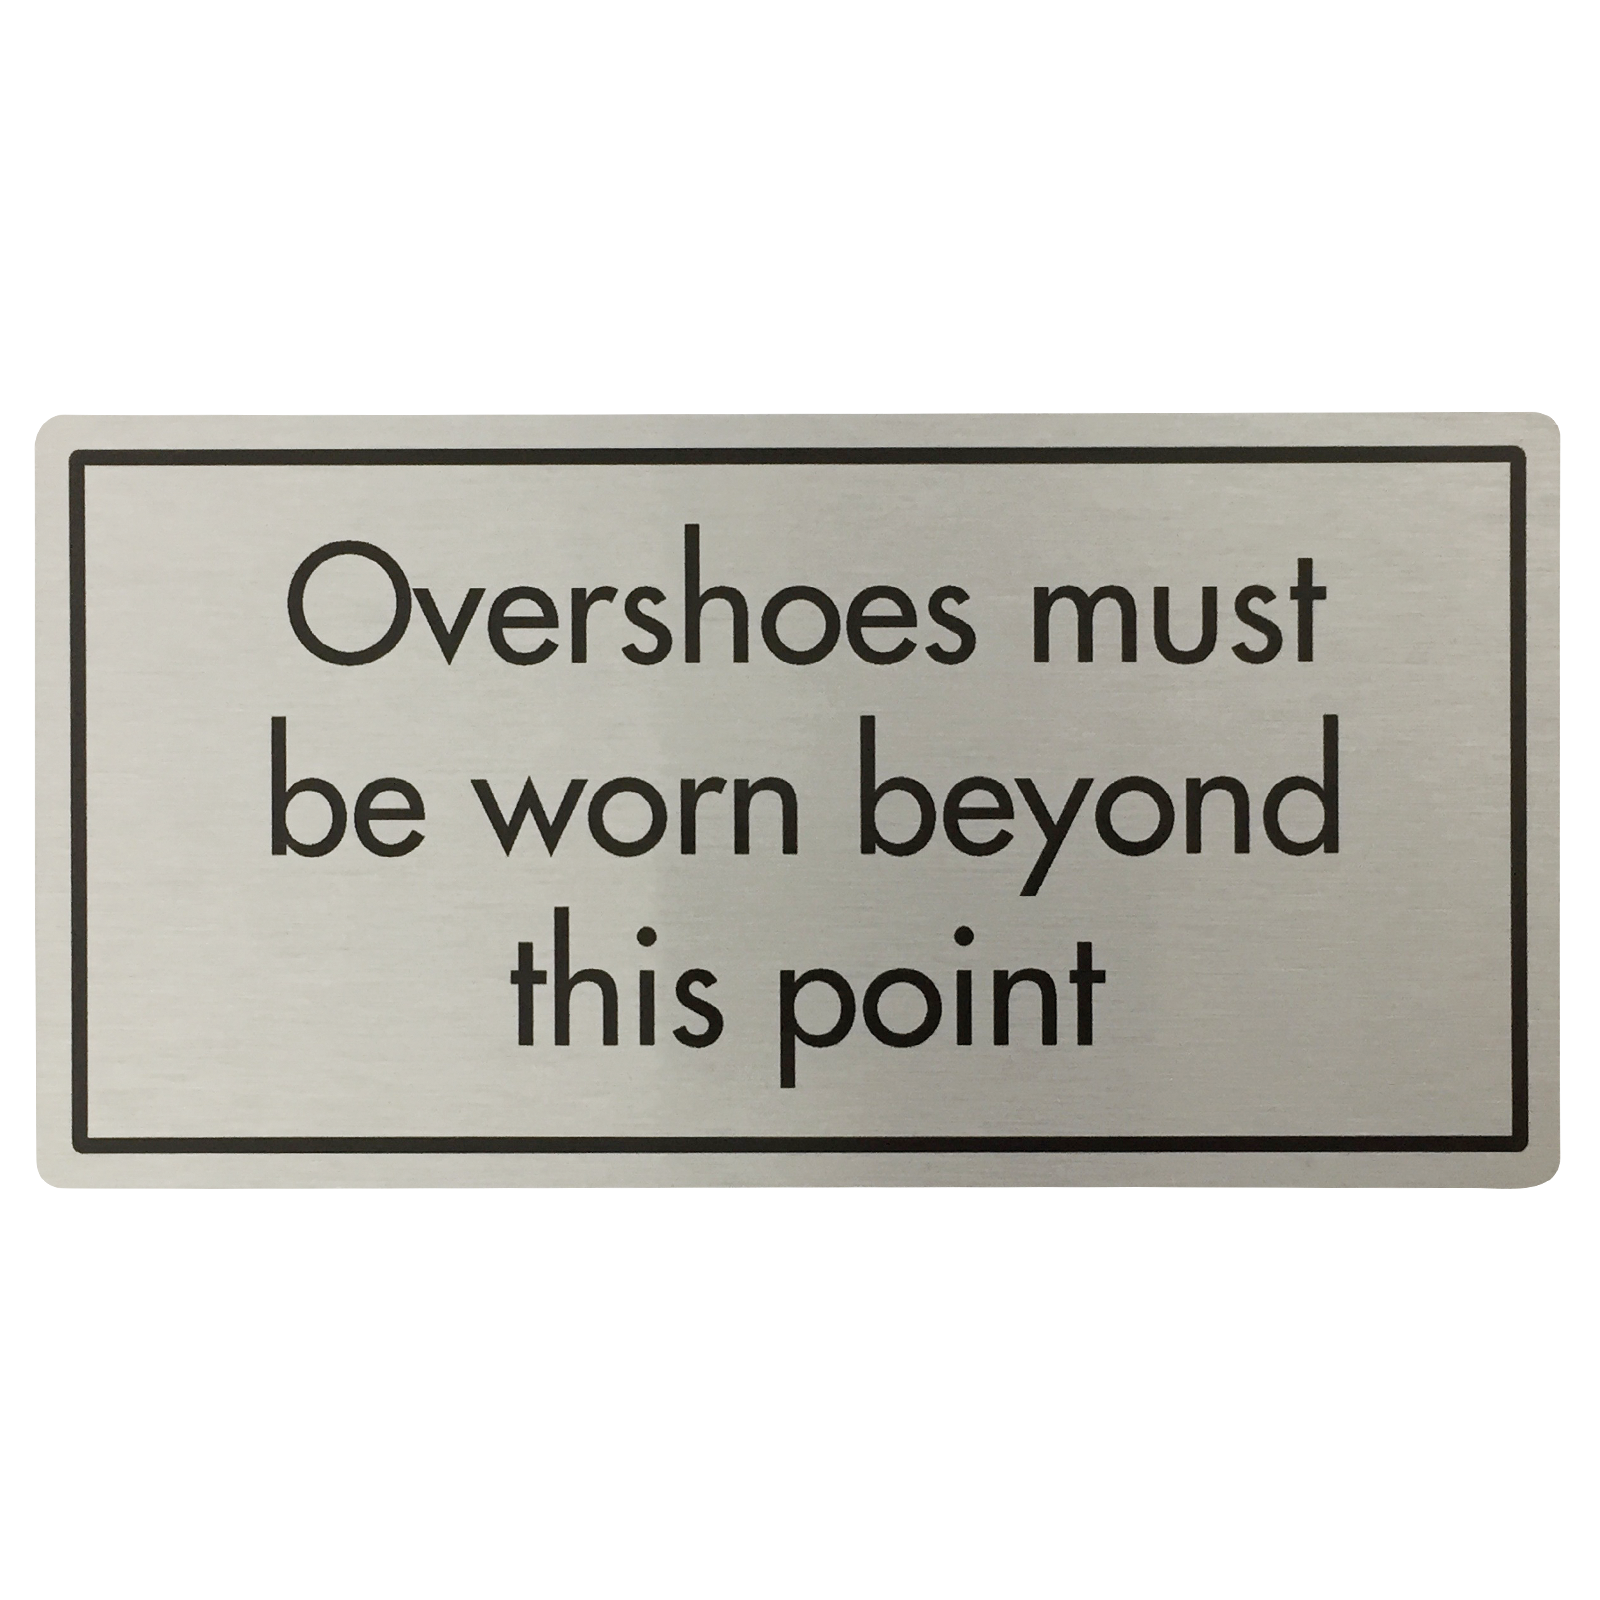 Overshoes Worn Beyond This Point Sign